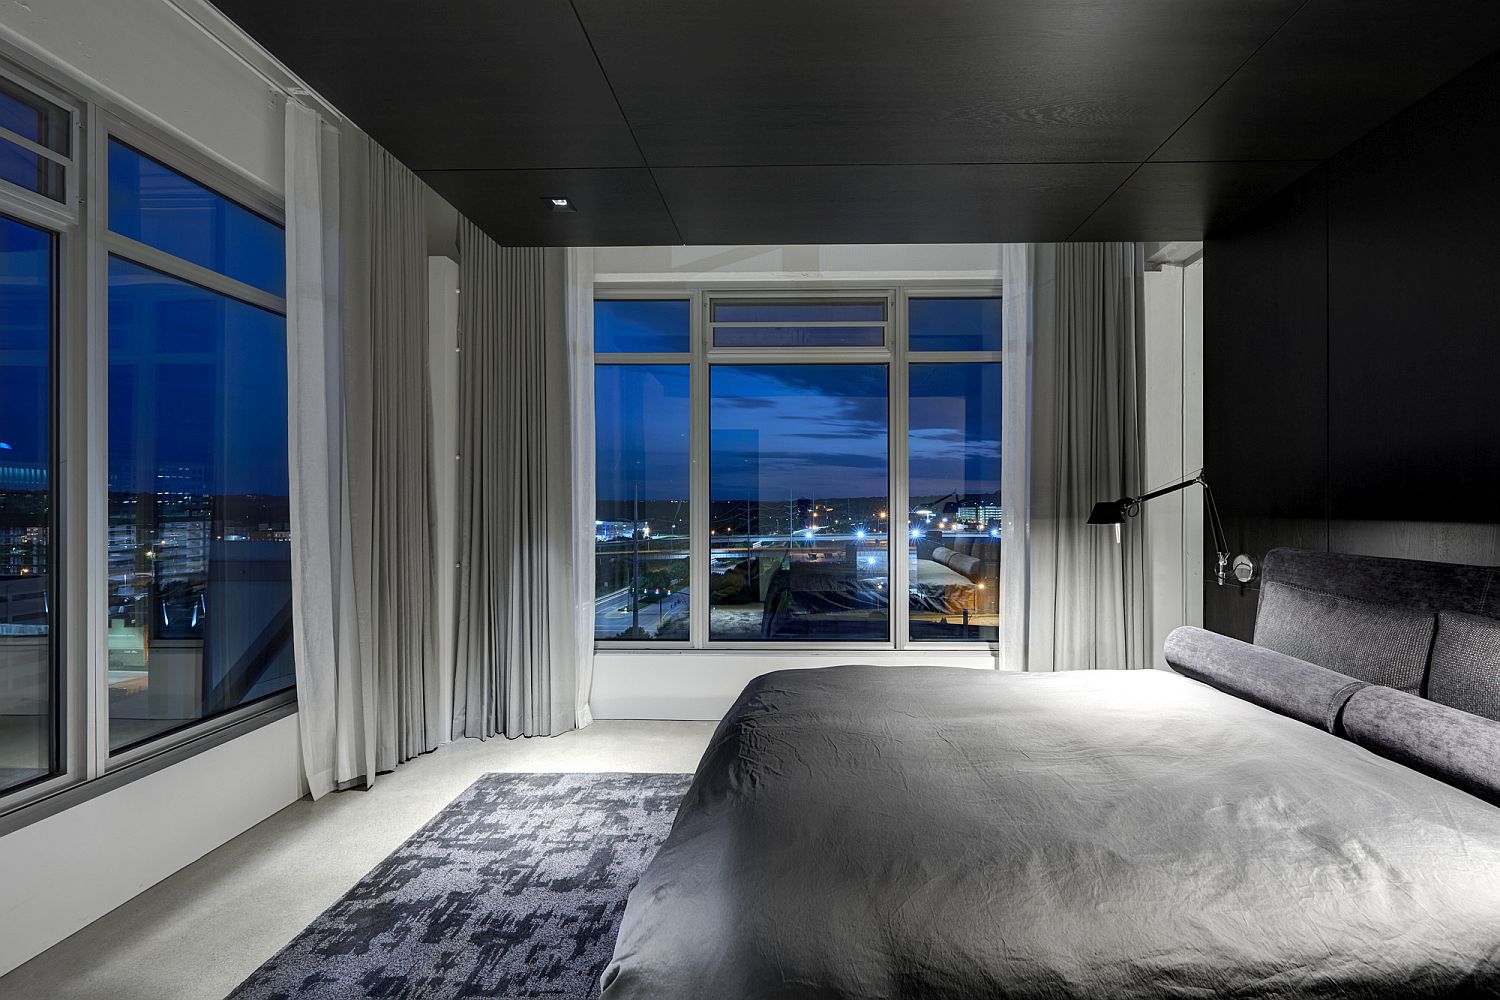 Dark wooden ceiling stands in contrast to the walls in white in the bedroom